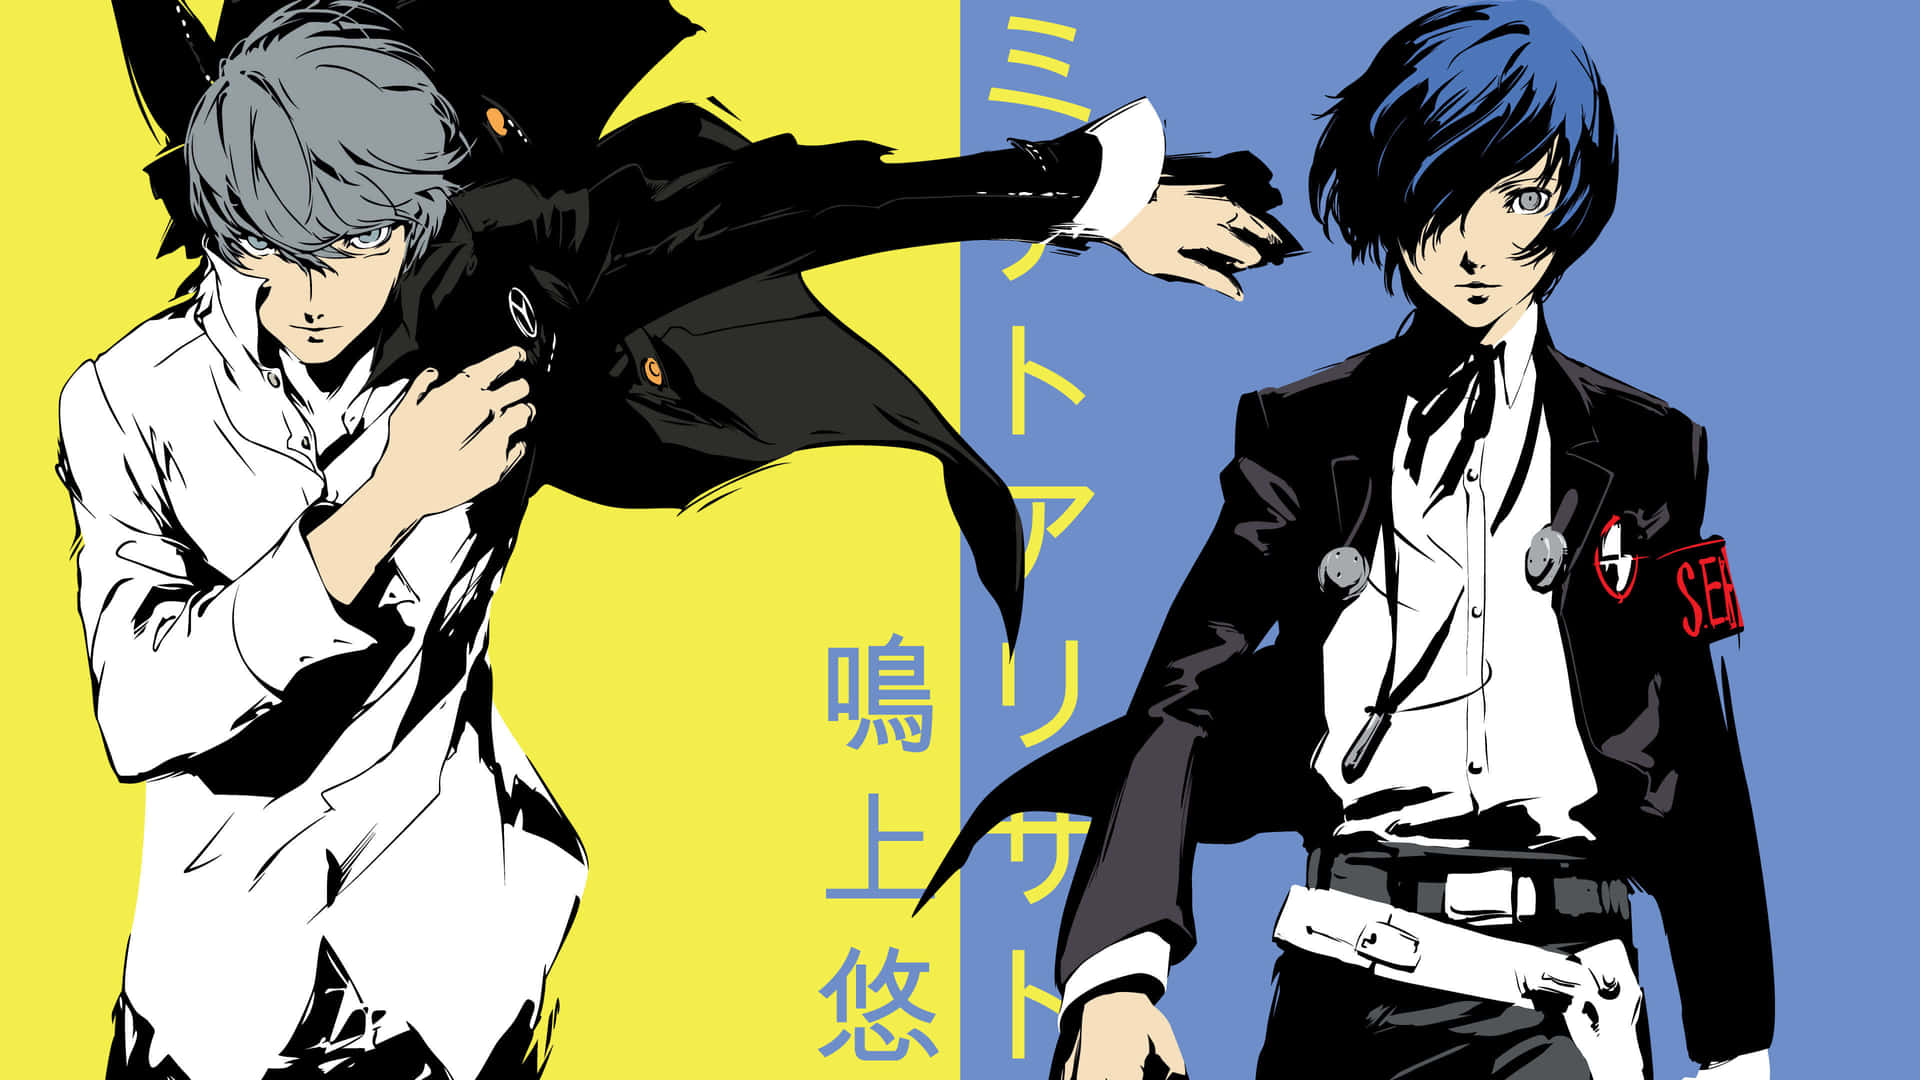 Two Anime Characters With Guns And A Yellow Background